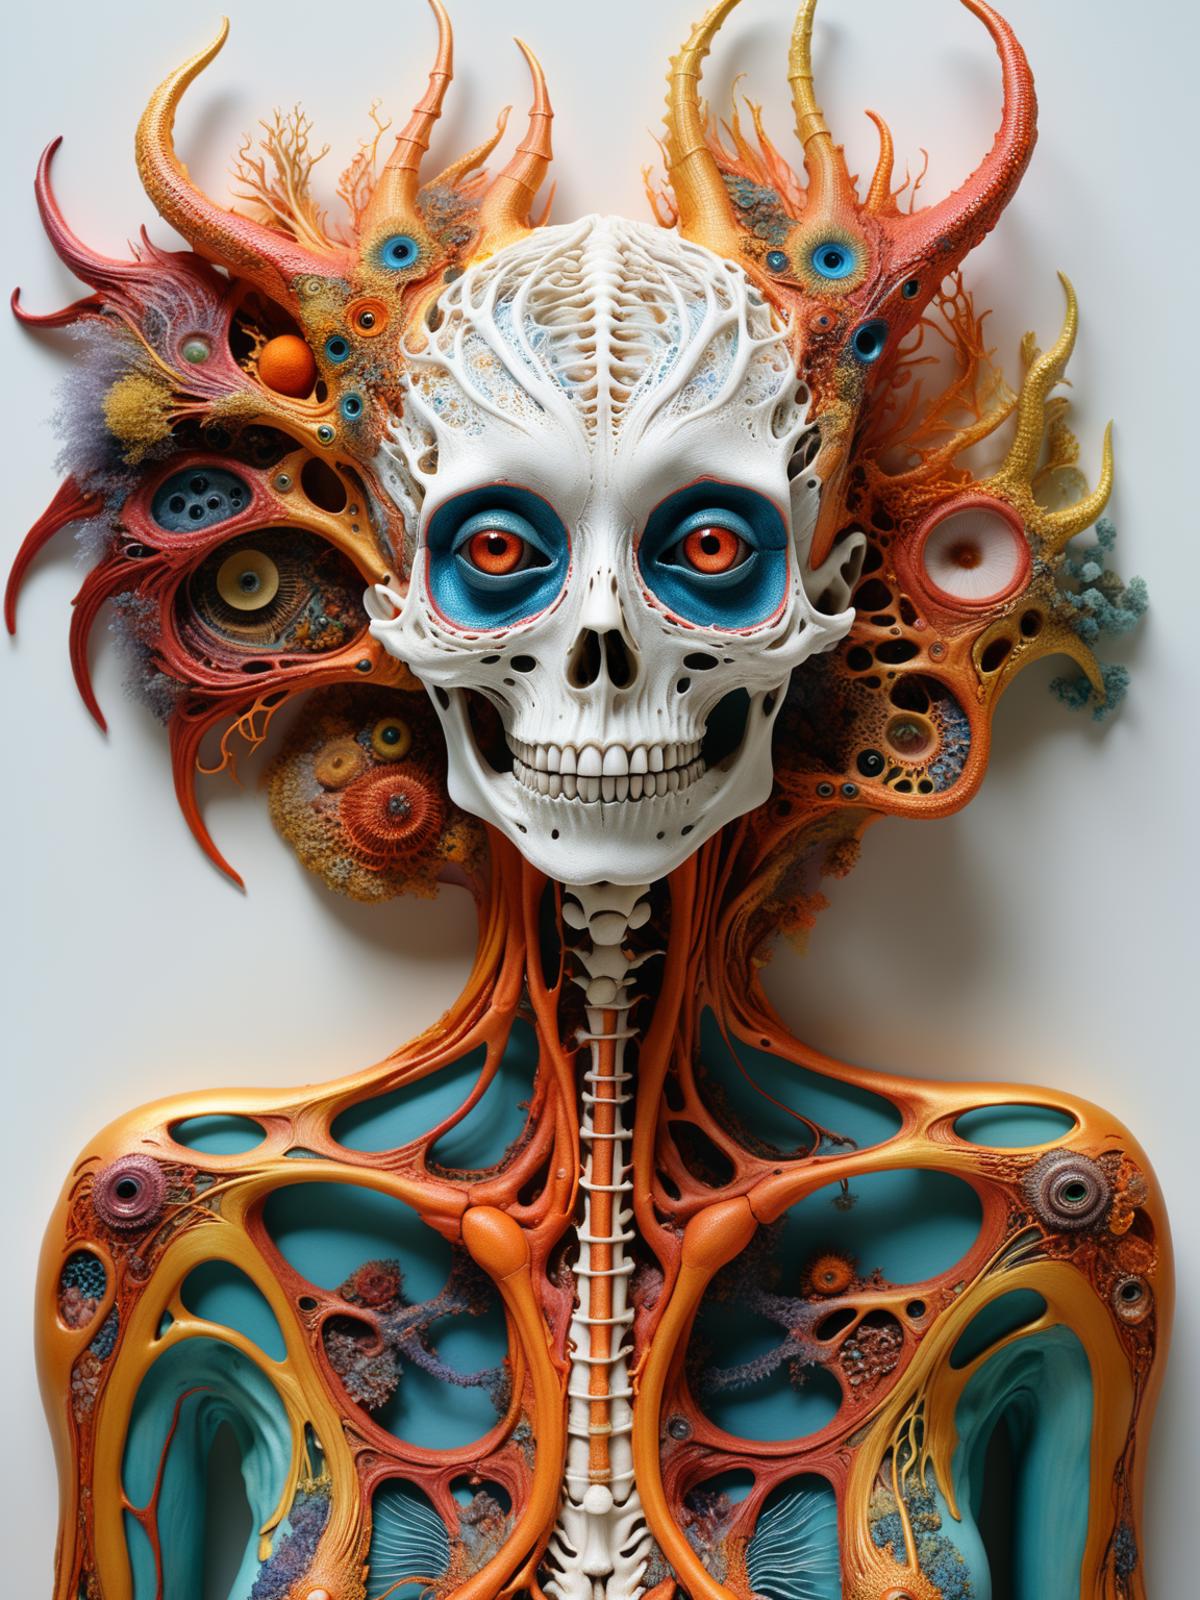 A skeleton with blue and orange eyes, adorned with various colorful elements, such as flowers and orbs, is displayed on a white background. The skeleton's head is prominently featured in the scene, with a unique and eye-catching design.